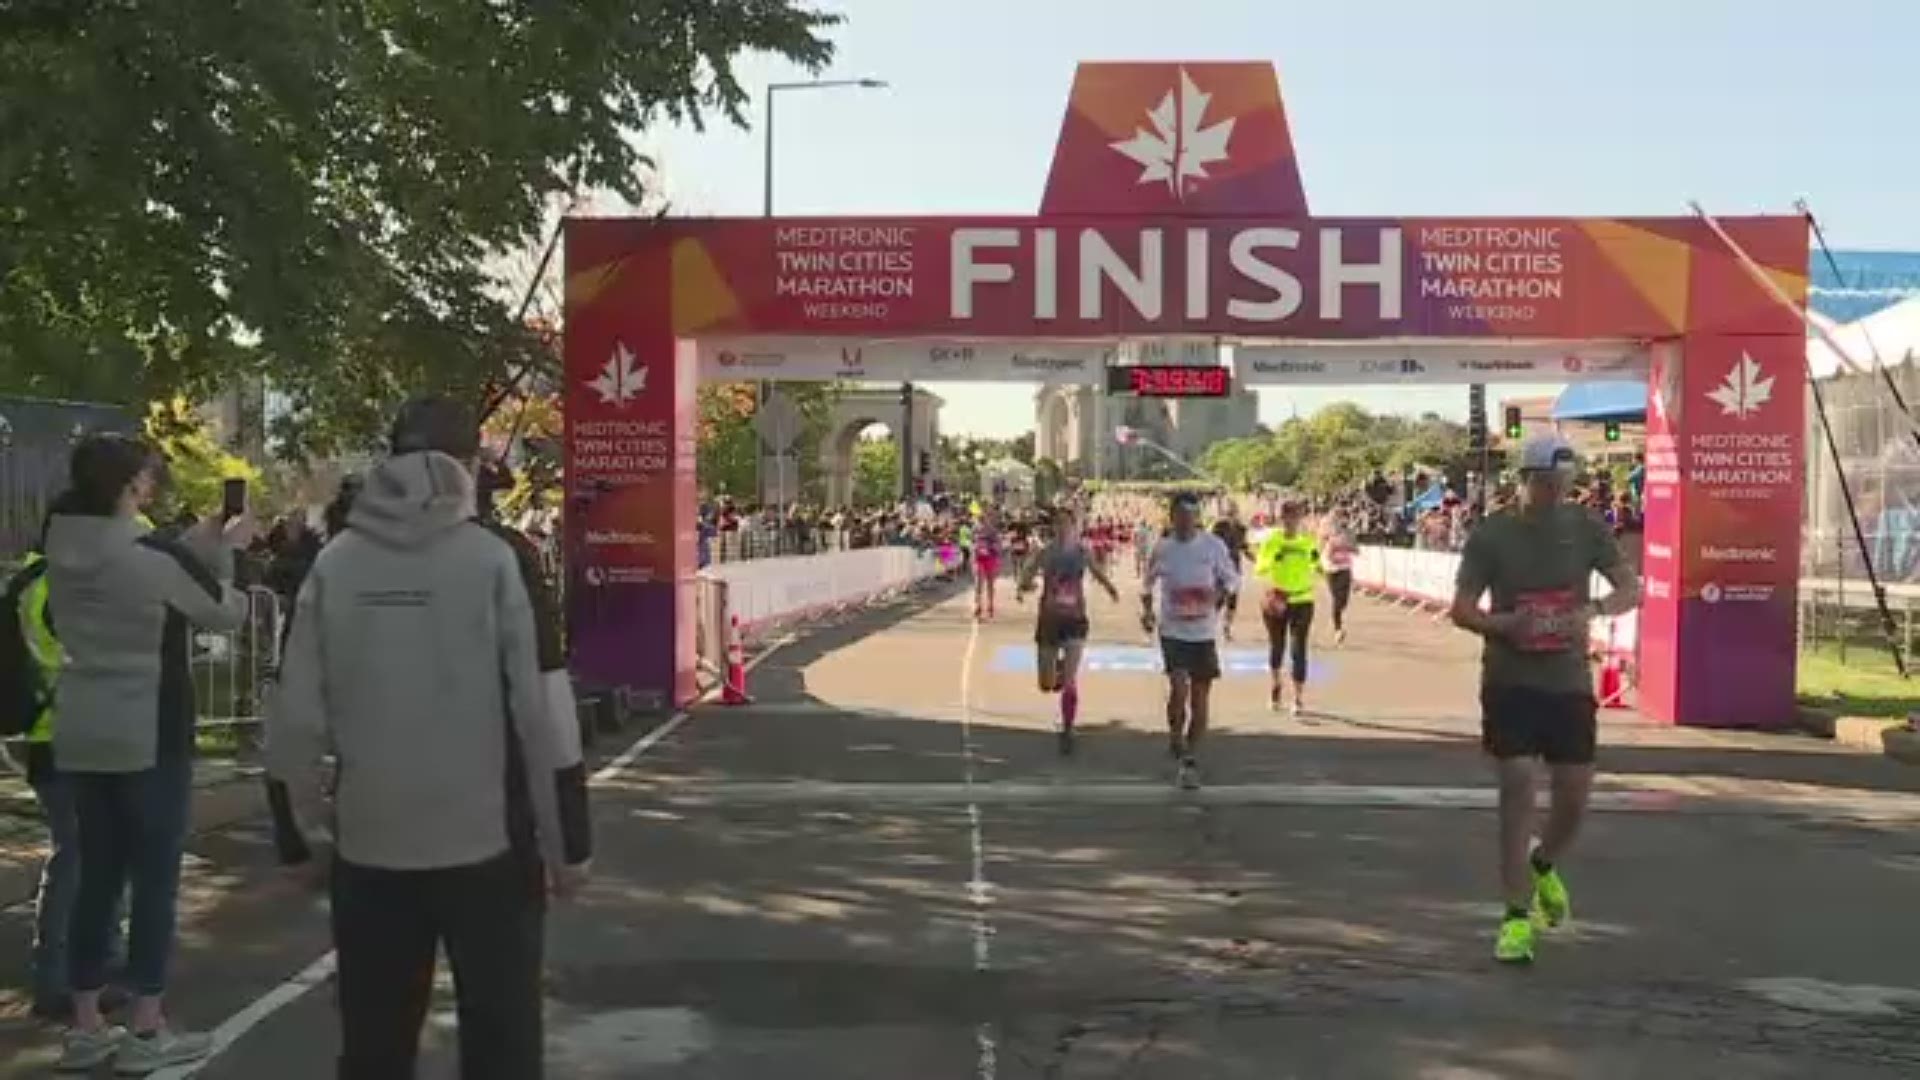 Thousands of runners competed in the Twin Cities Marathon races. Here are racers as they crossed the finish line on Sunday.